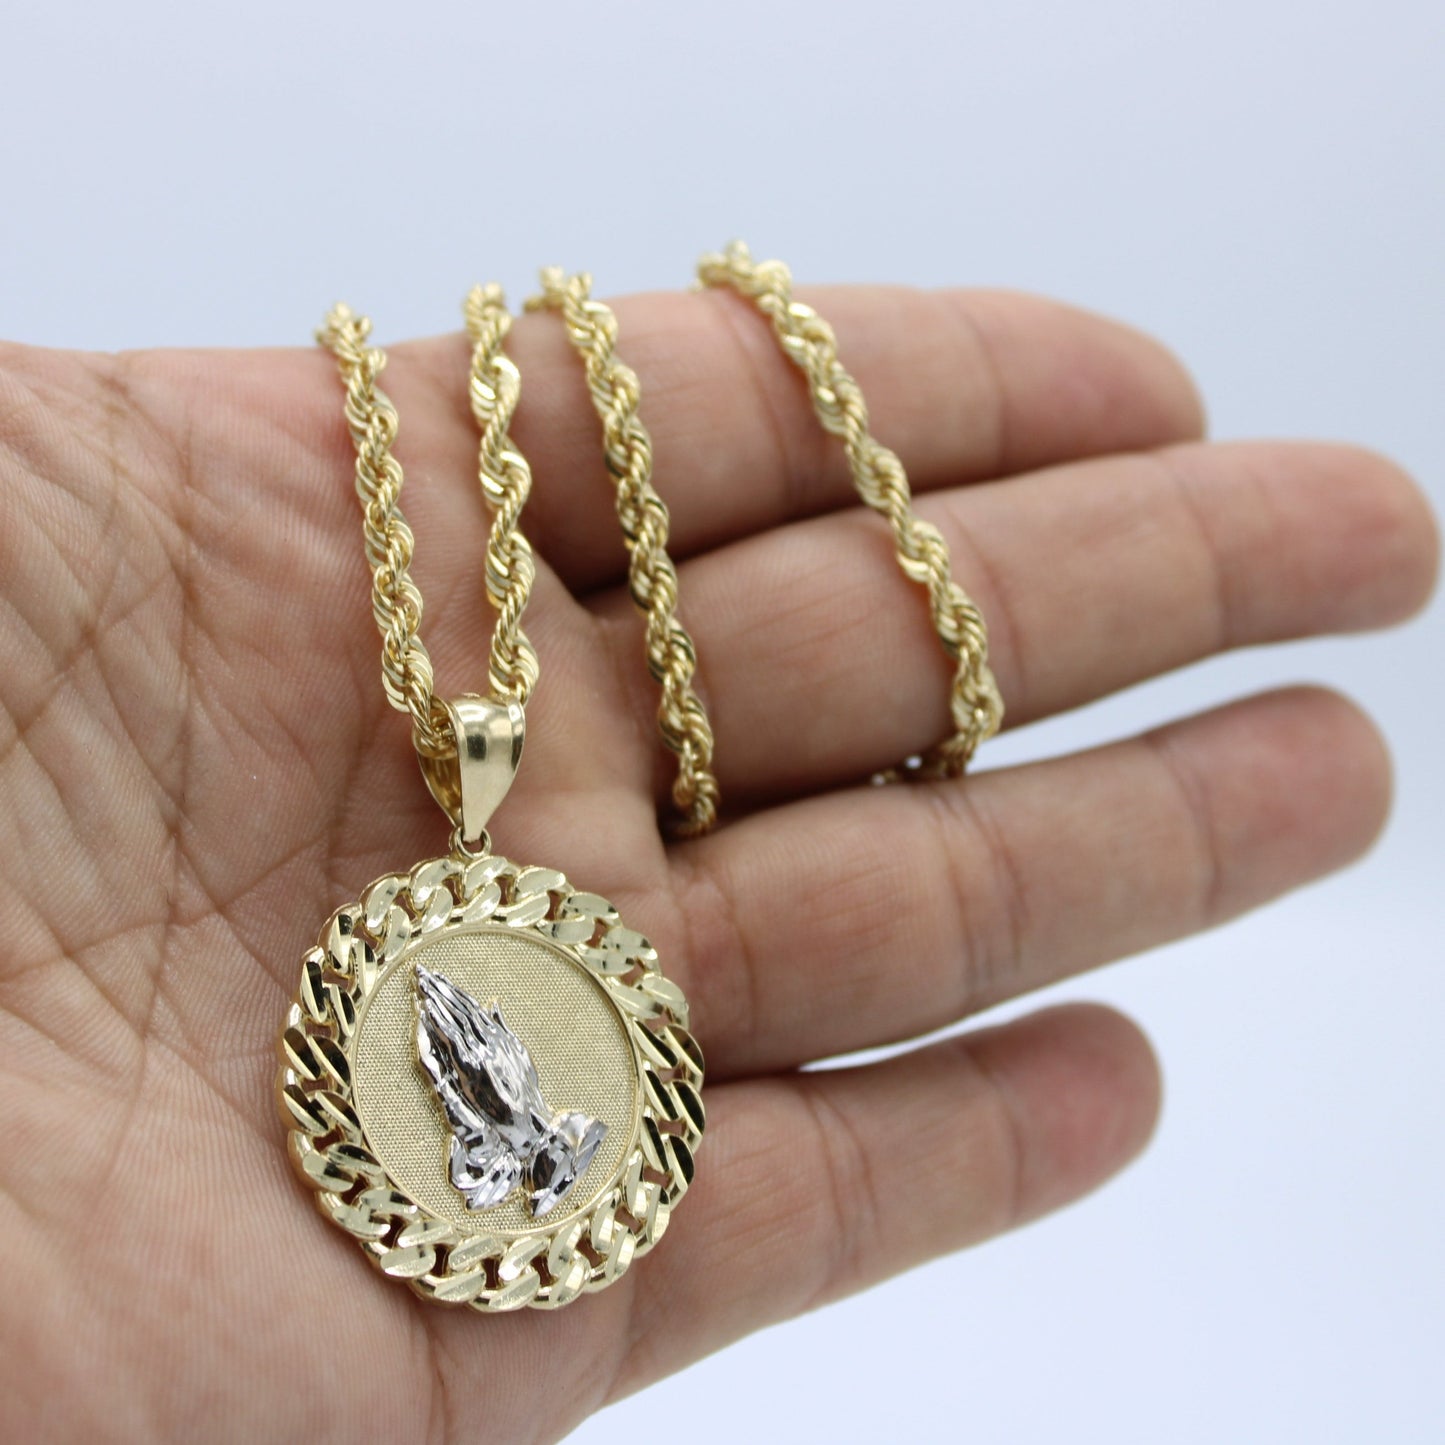 14K Pray Hands Pendant Two Tones with Rope Chain Yellow Gold